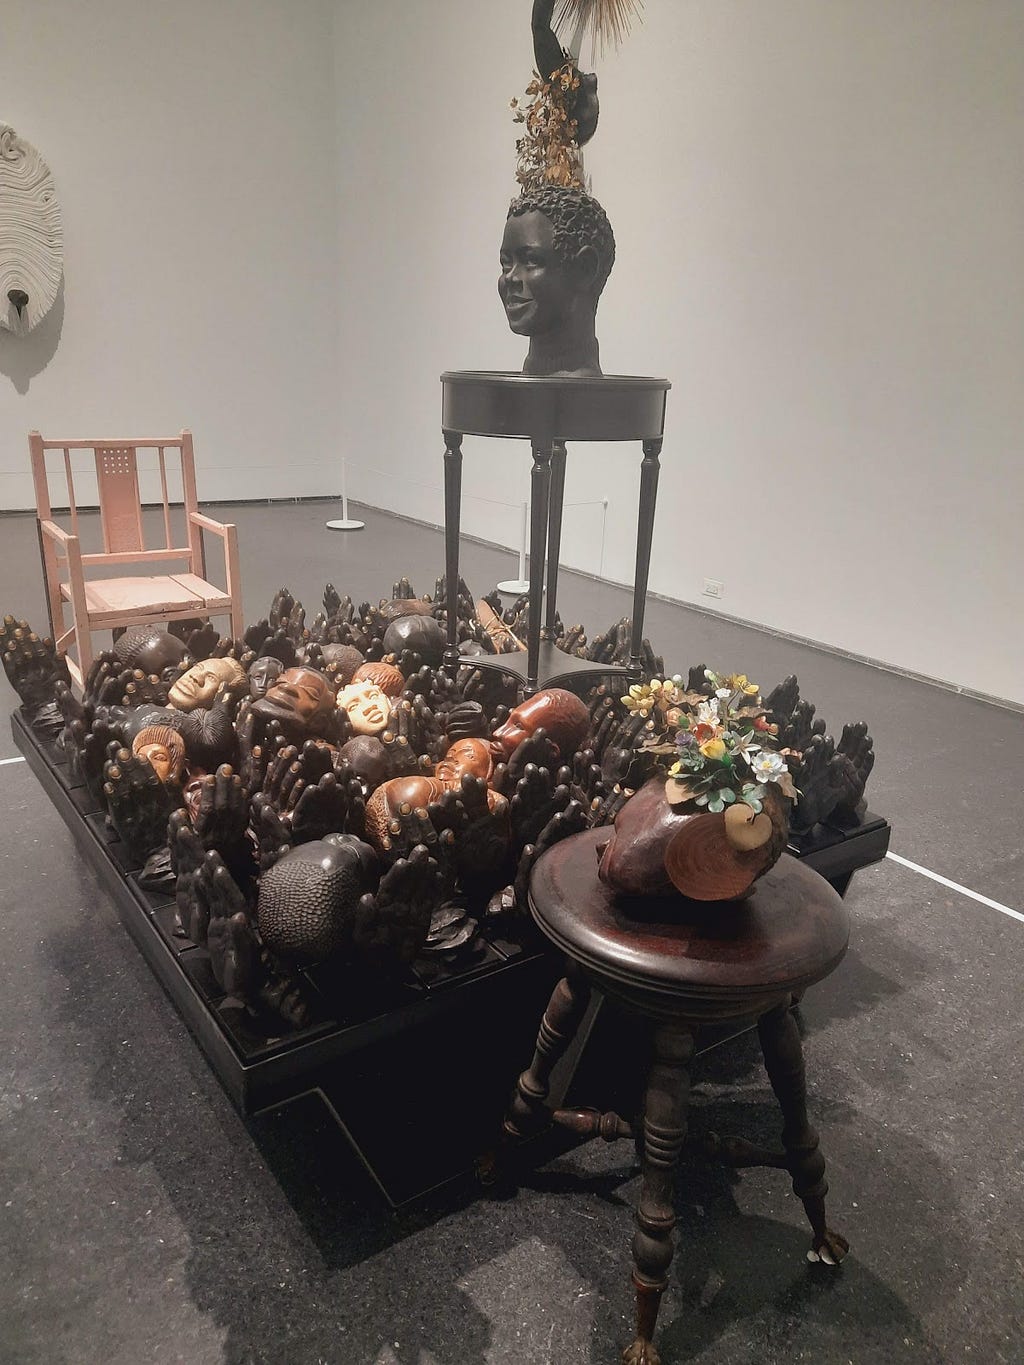 Image of Nick Cave sculpture featuring various wooden faces and hands